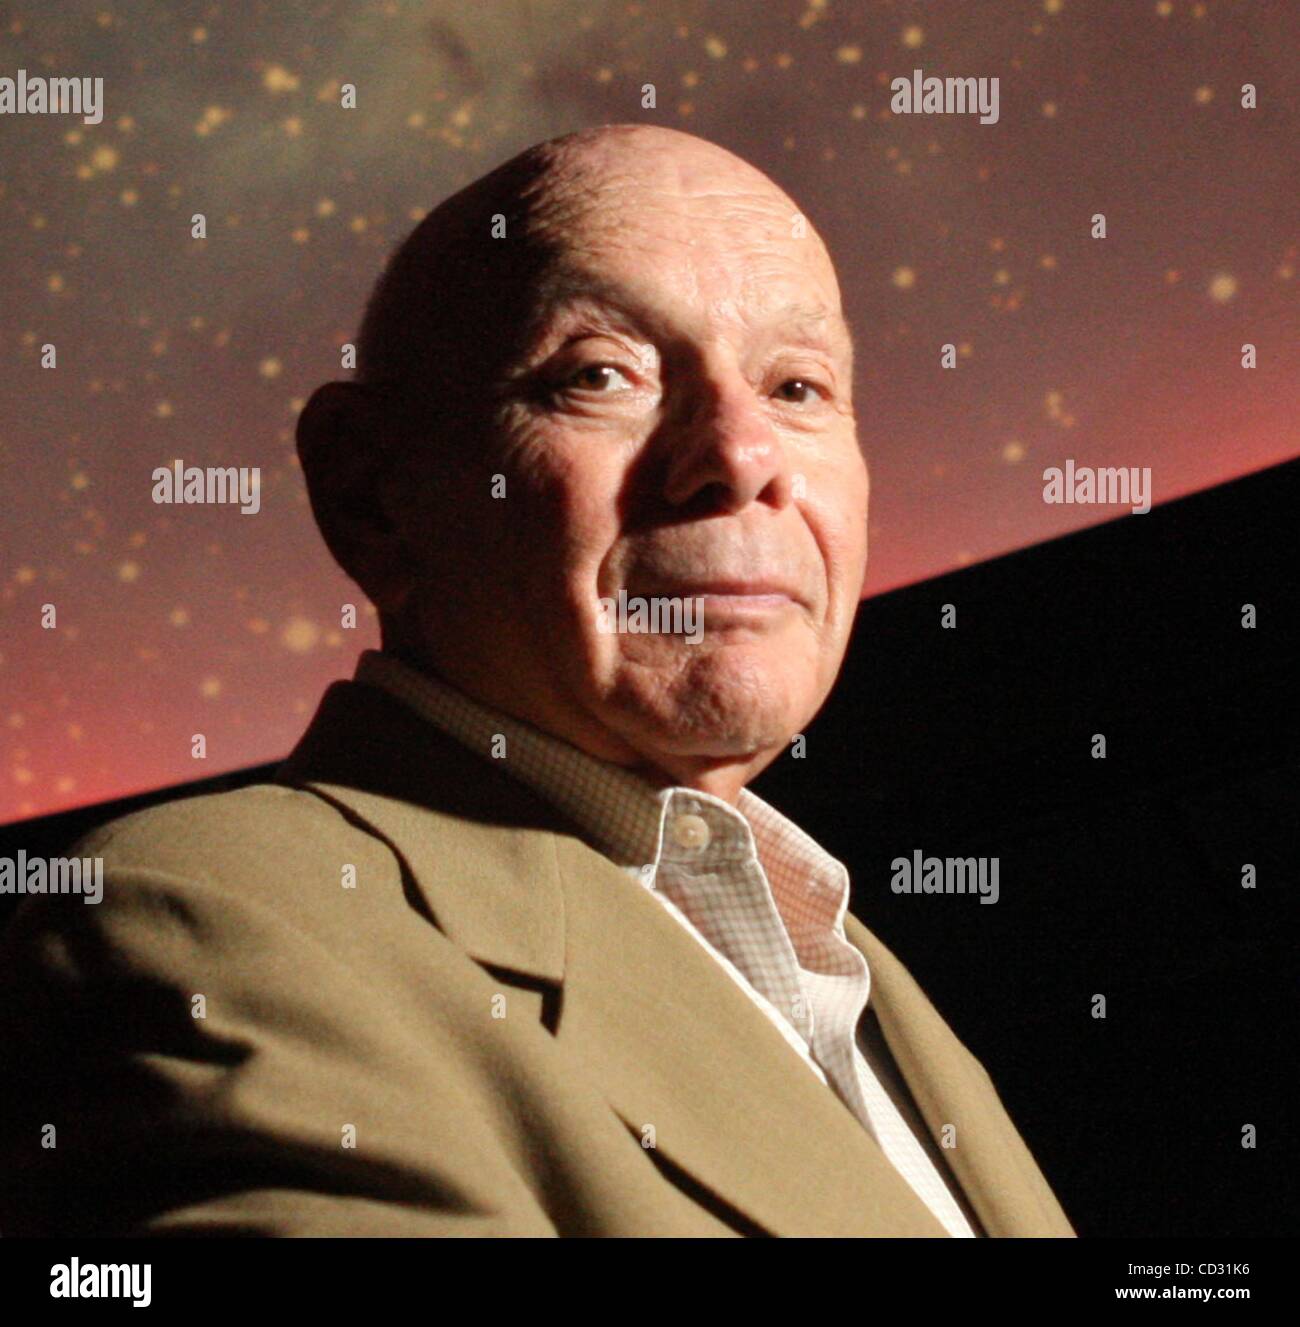 Apr 02, 2008 - Palm Beach, Florida, USA - MEL MERON poses for a portrait at the South Florida Science Museum. Meron was involved in the distribution of the film 2001: A Space Odyssey for MGM. He is currenntly President of JGM Enterprises, Inc.  (Credit Image: Â© Bruce R. Bennett/Palm Beach Post/ZUMA Stock Photo